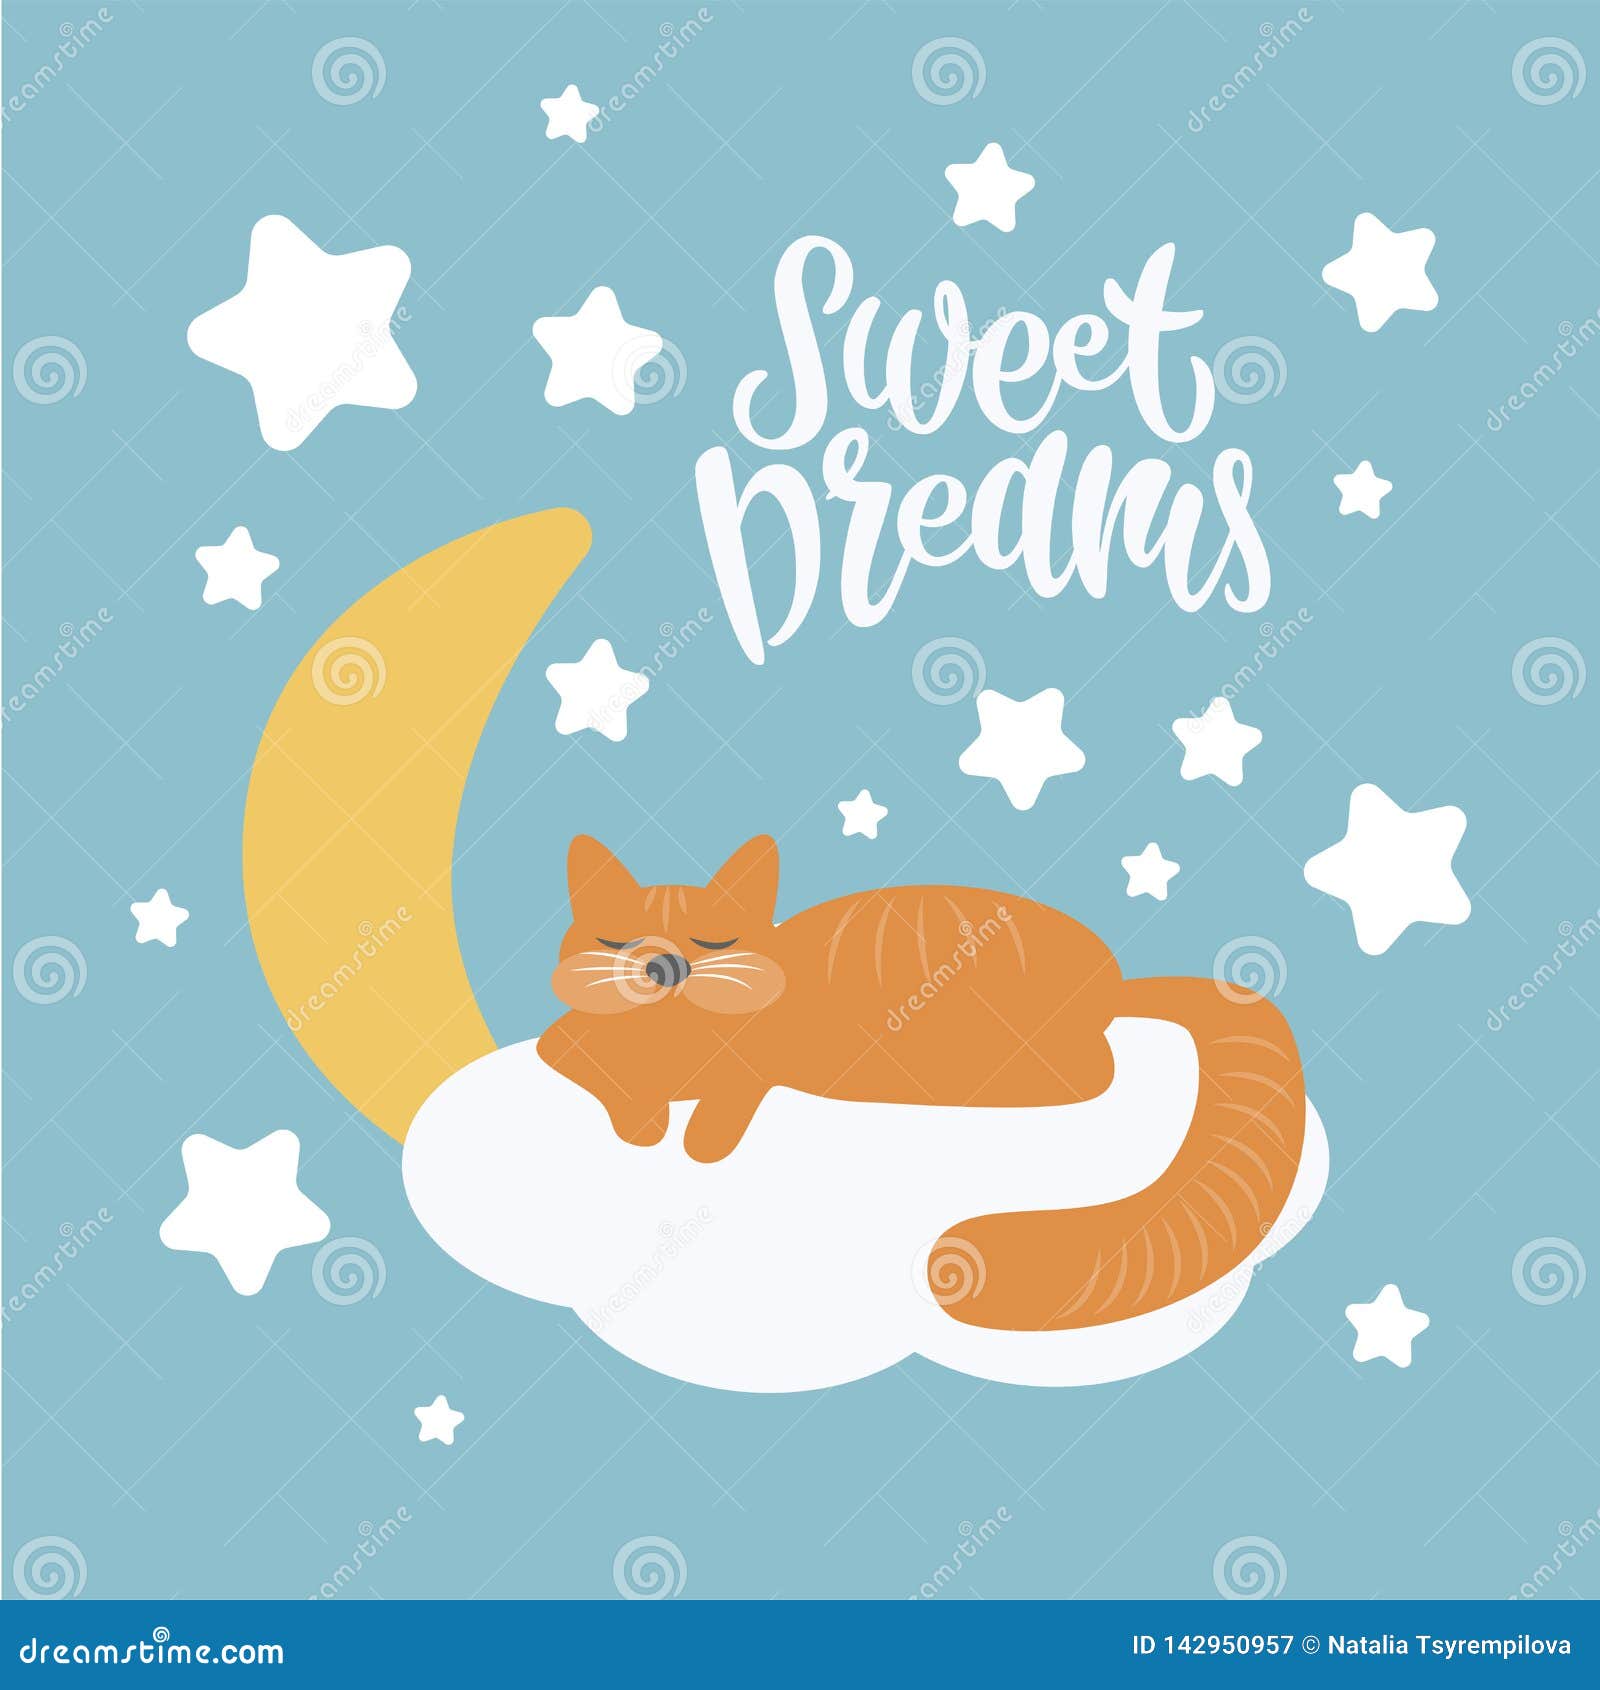 Sweet Dreams Colorful Hand Drawn Vector Illustration Stock Vector ...